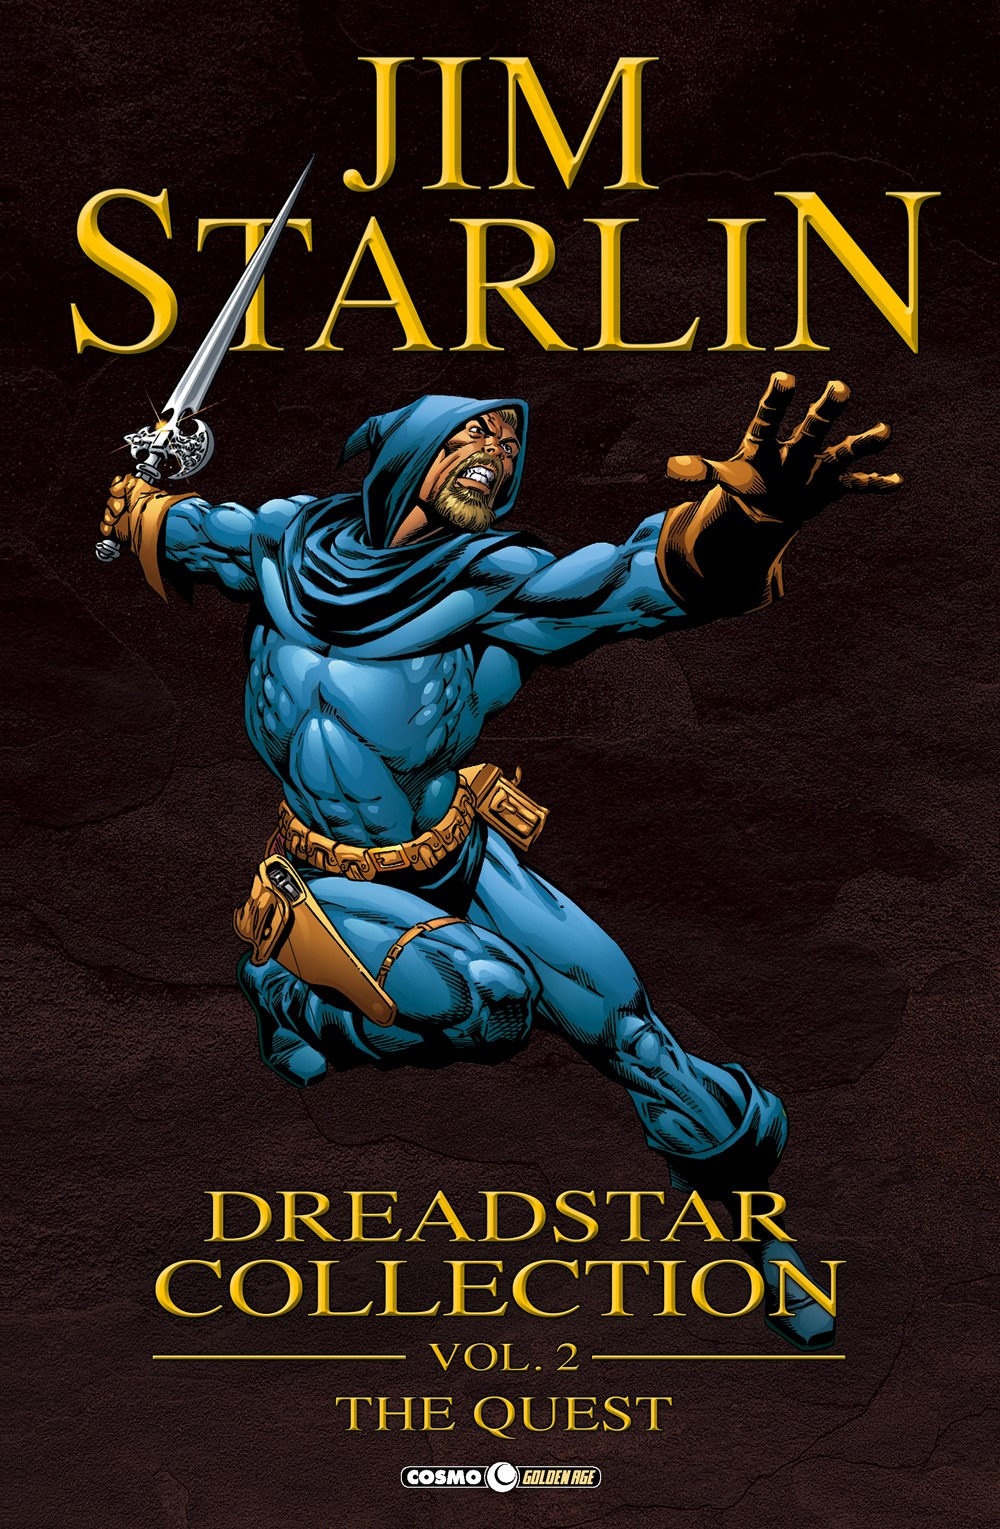 Dreadstar collection. Vol. 2: The quest